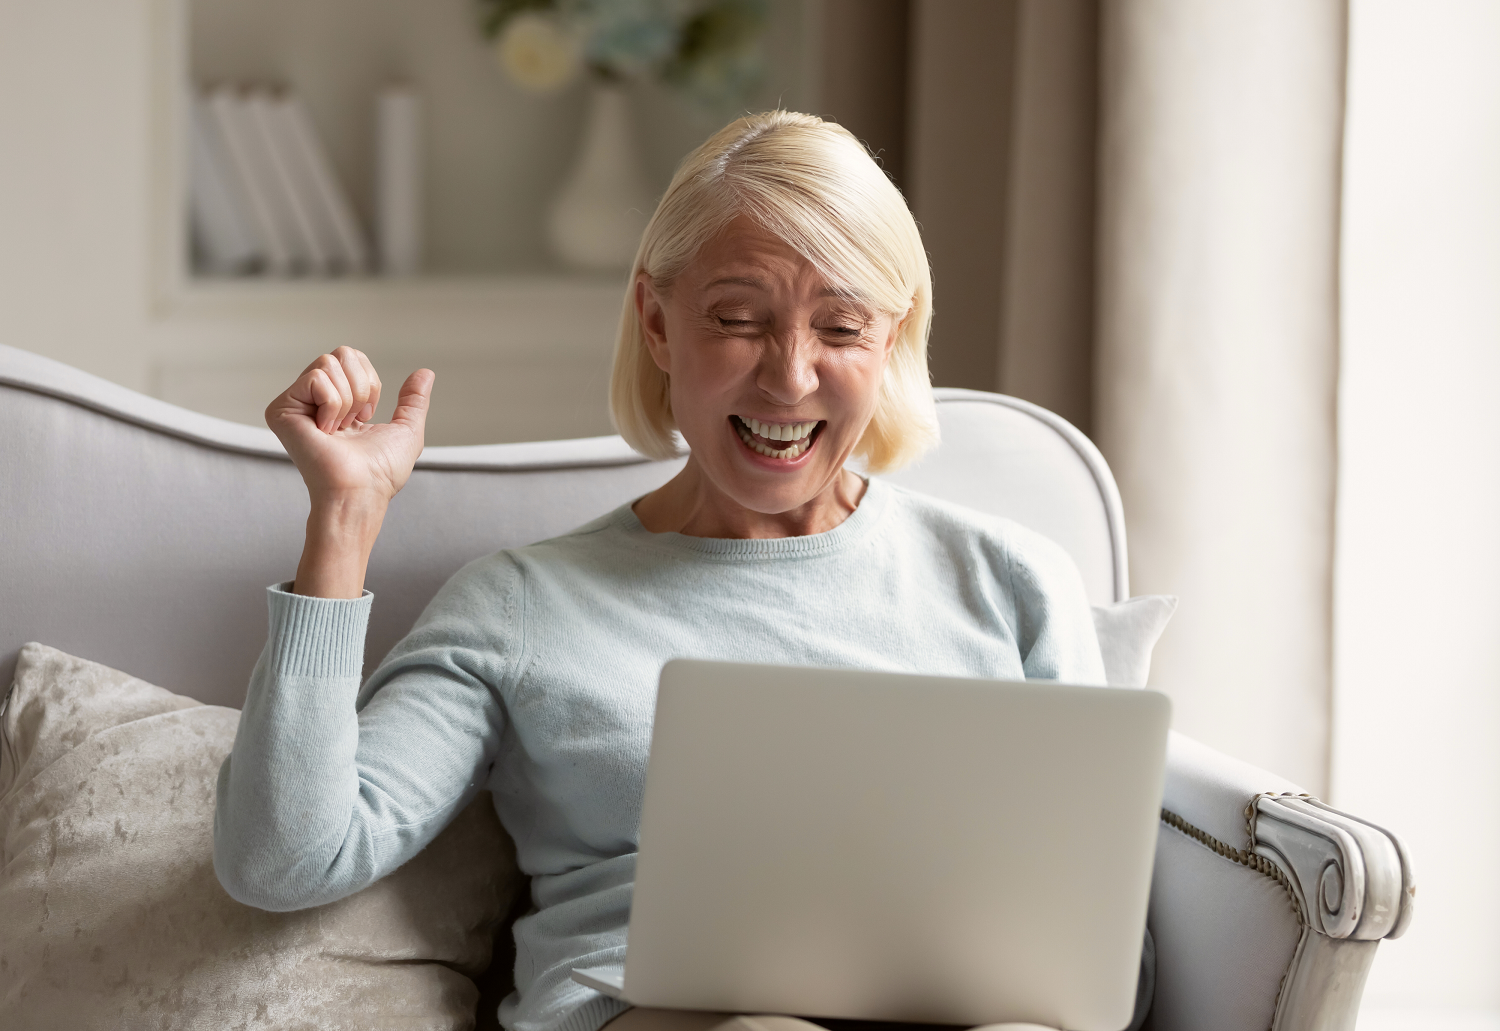 A senior woman celebrating as she wins an online lottery, representing prize-led charity fundraising trends.